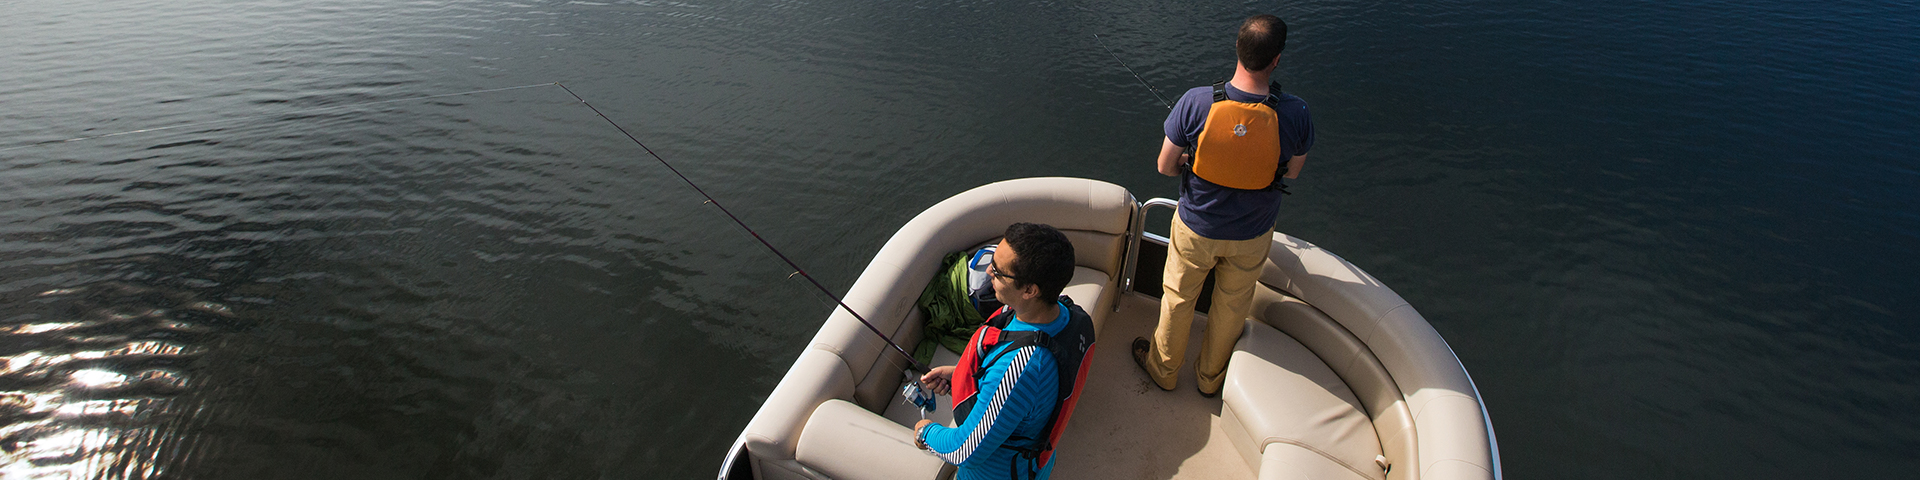 A group of visitors go fishing in a fishing boat on Waskesiu Lake during a summer day in Prince Albert National Park.